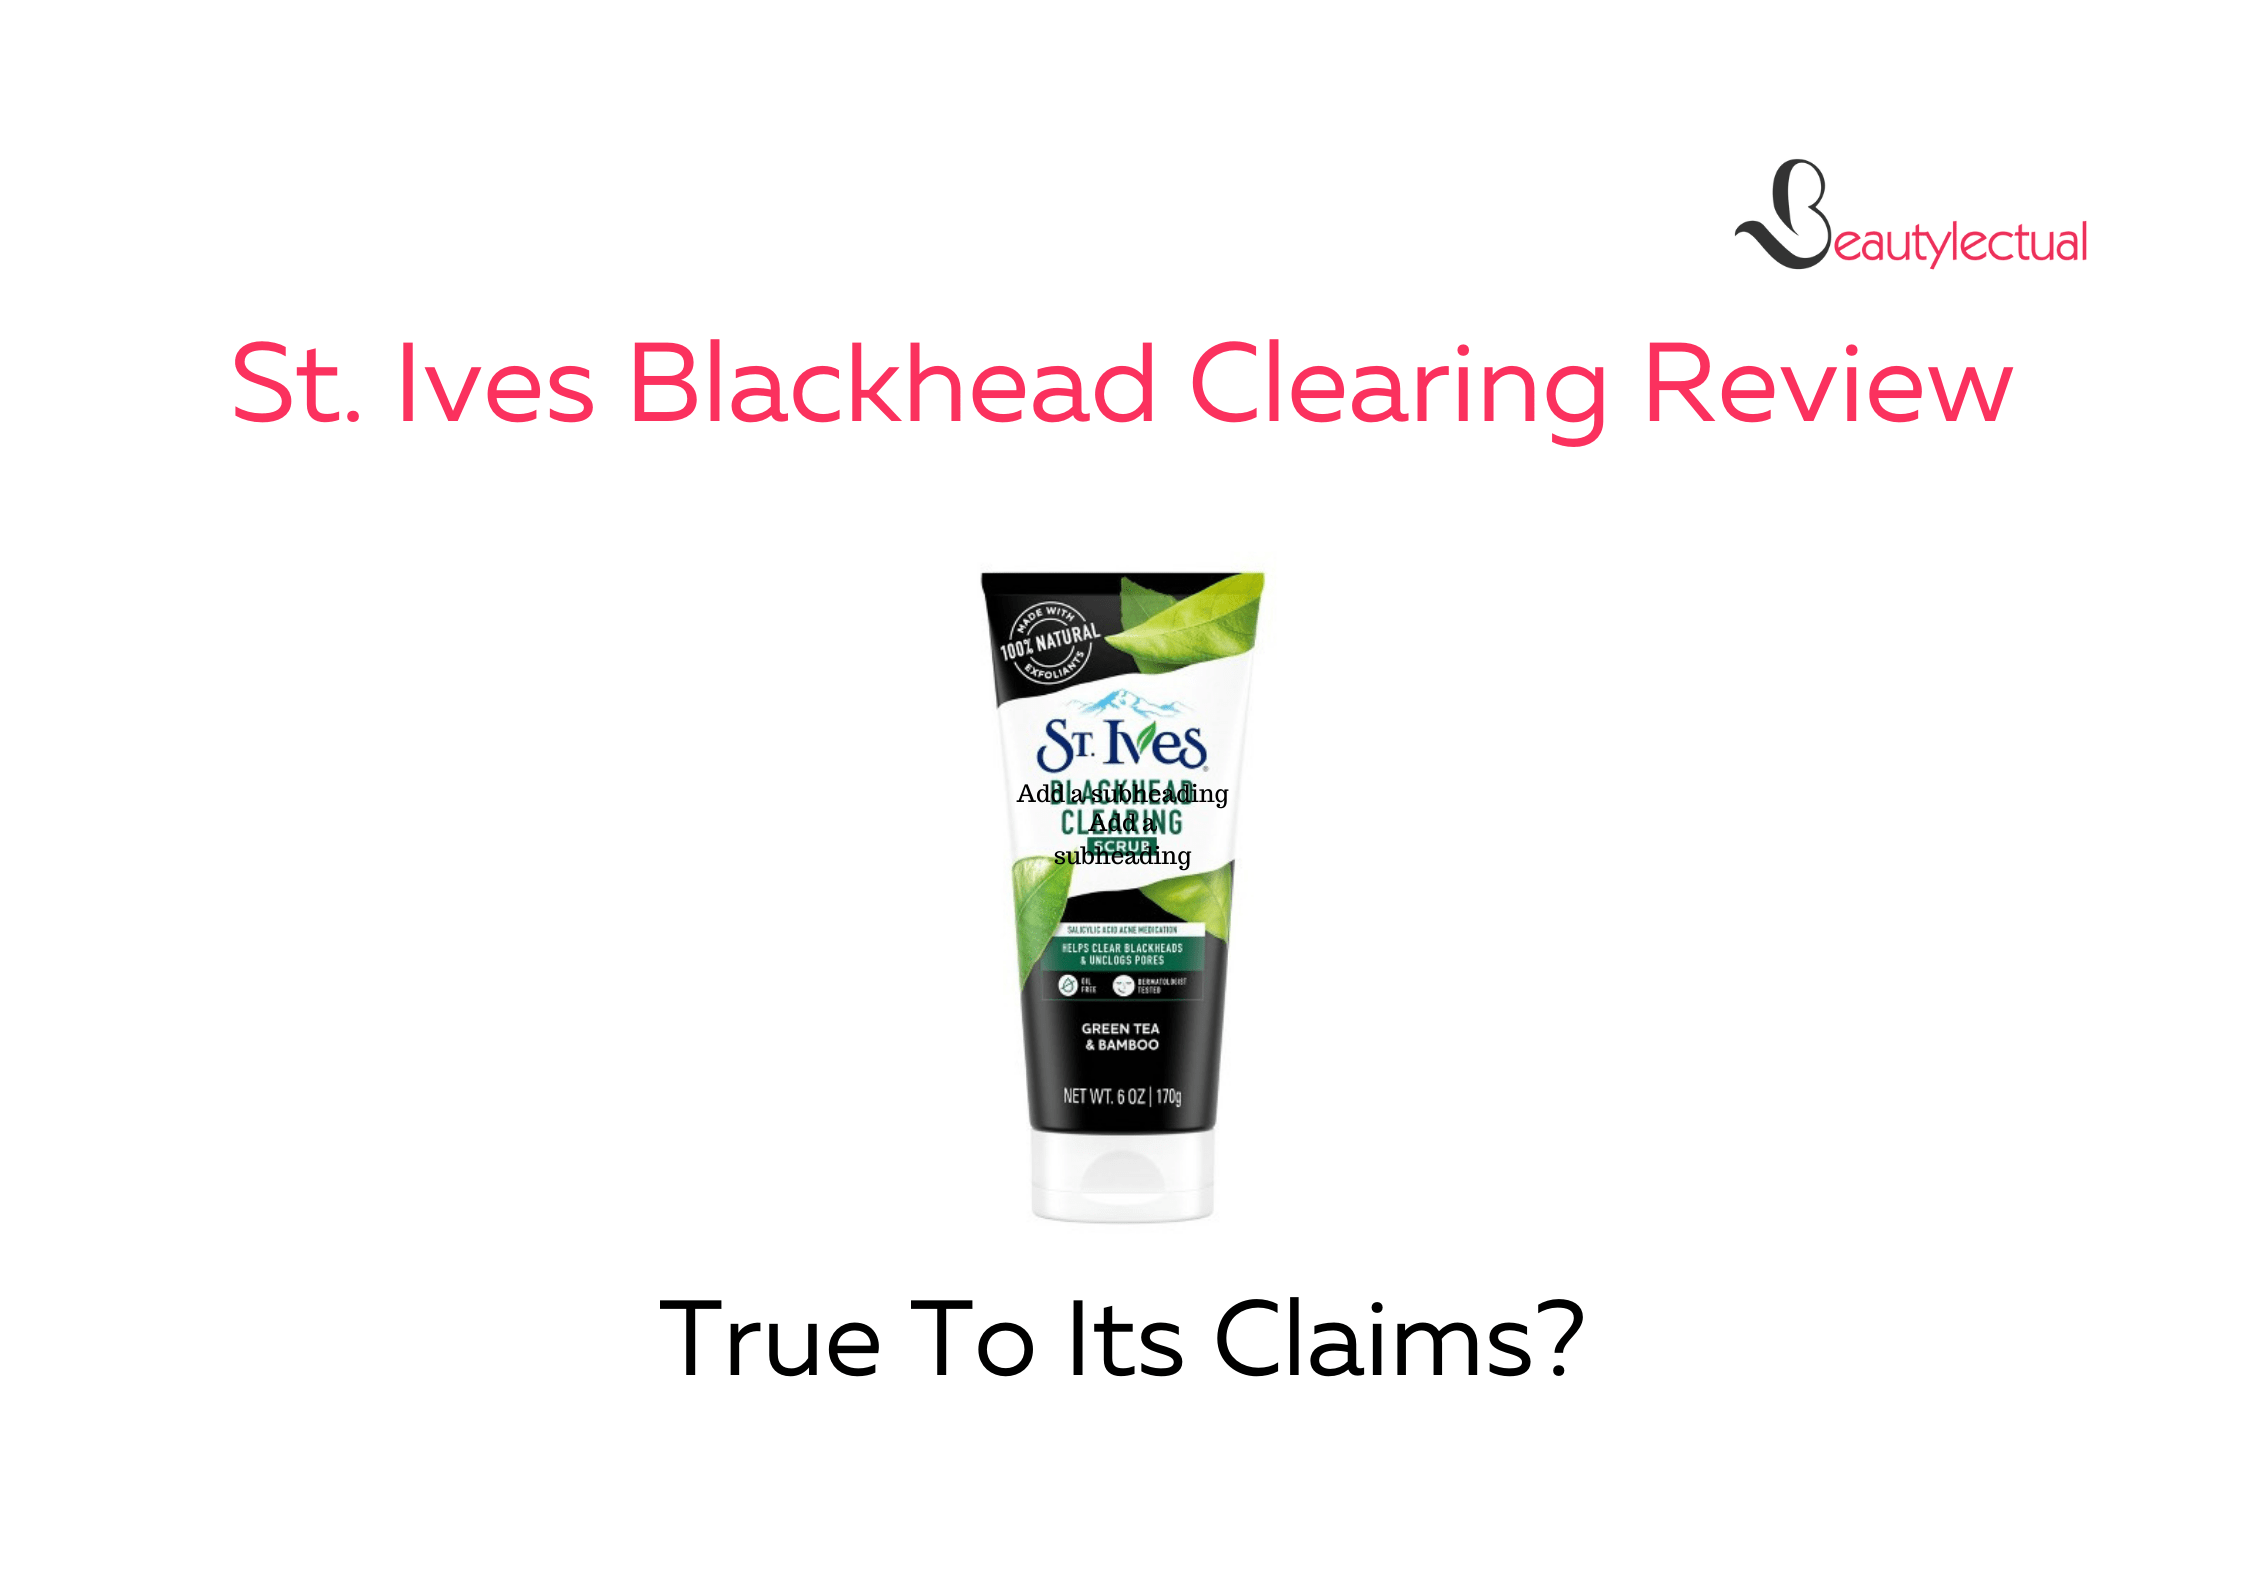 St. Ives Blackhead Clearing Review